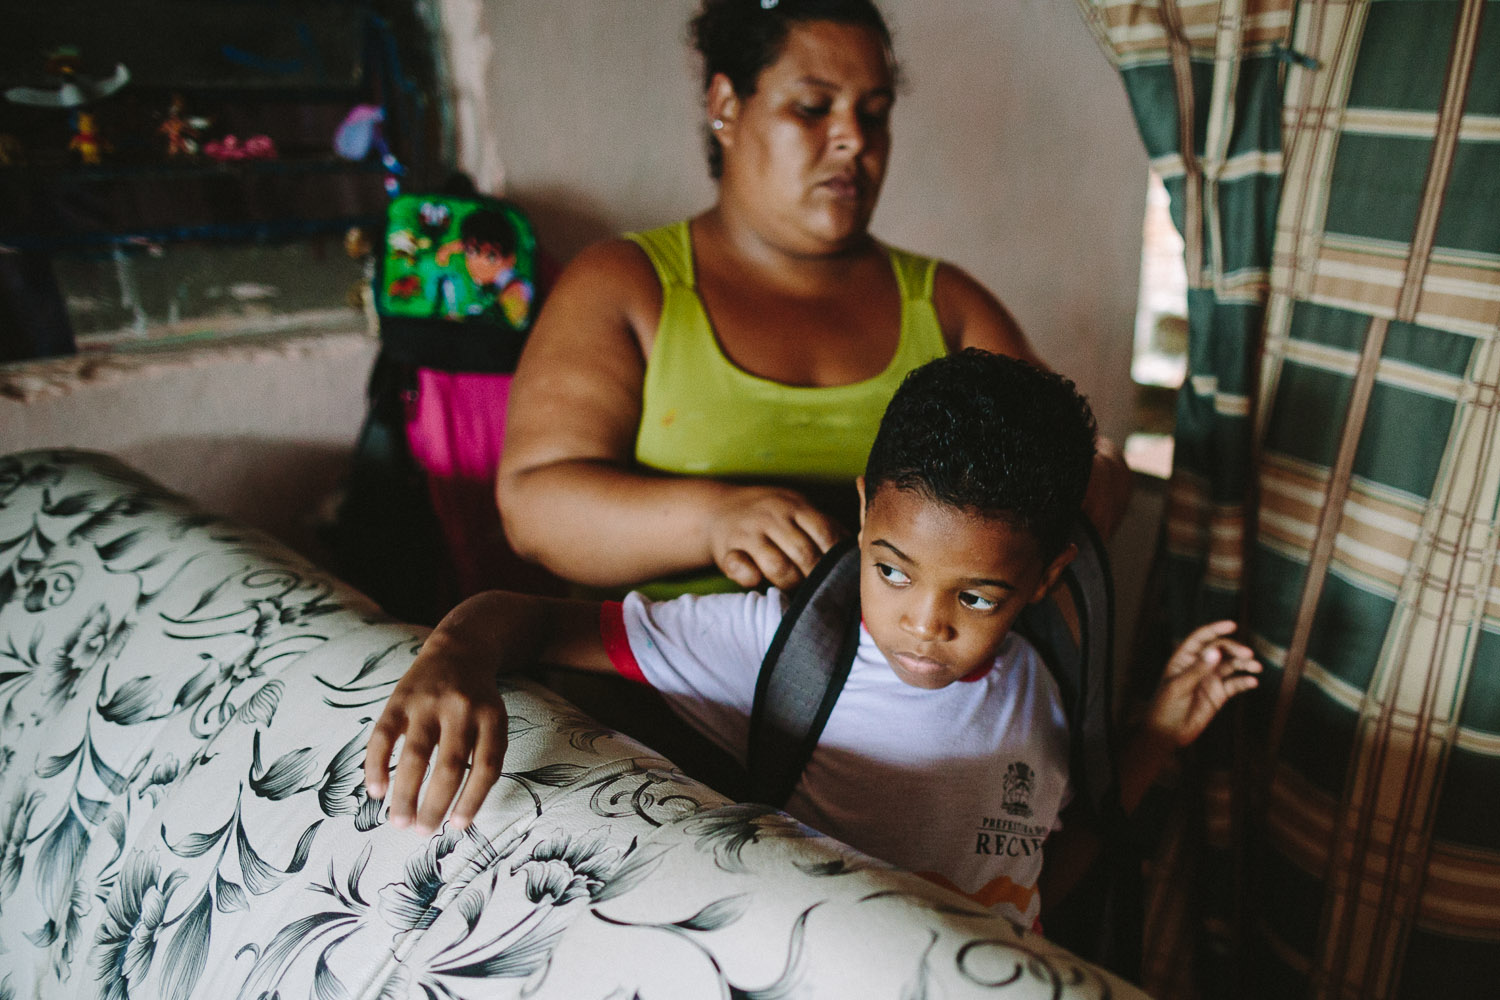   His mother's friend gets Emidio ready for school each day. Each day an "aunt" (family friend--relation) takes care of Emidio and his younger brother between his time at the Compassion Center and School since his mother works until 10pm at night.  